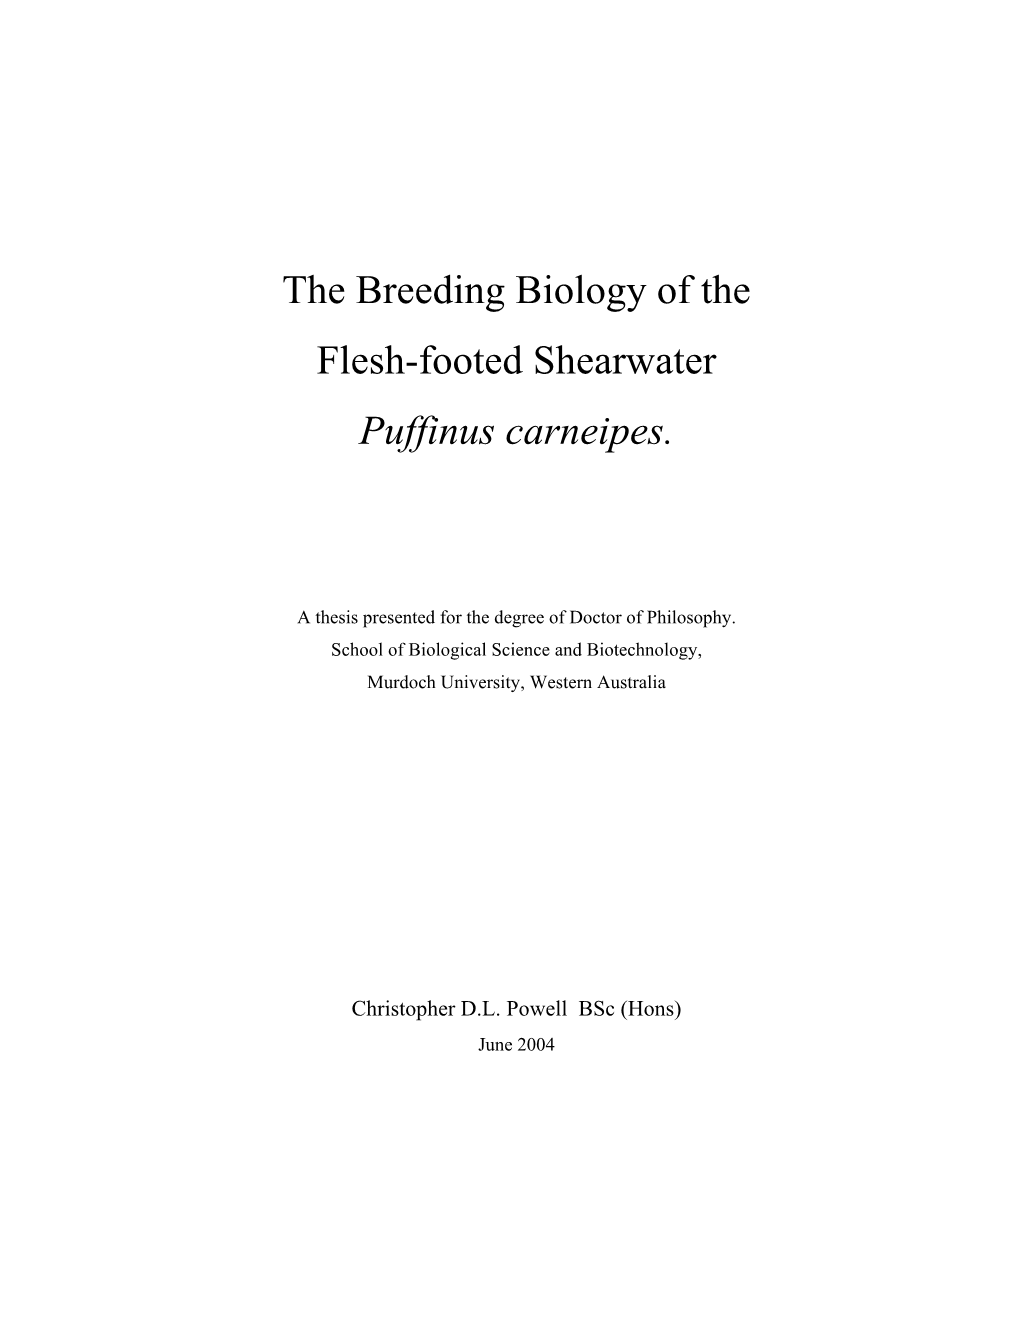 The Breeding Biology of the Flesh-Footed Shearwater Puffinus Carneipes